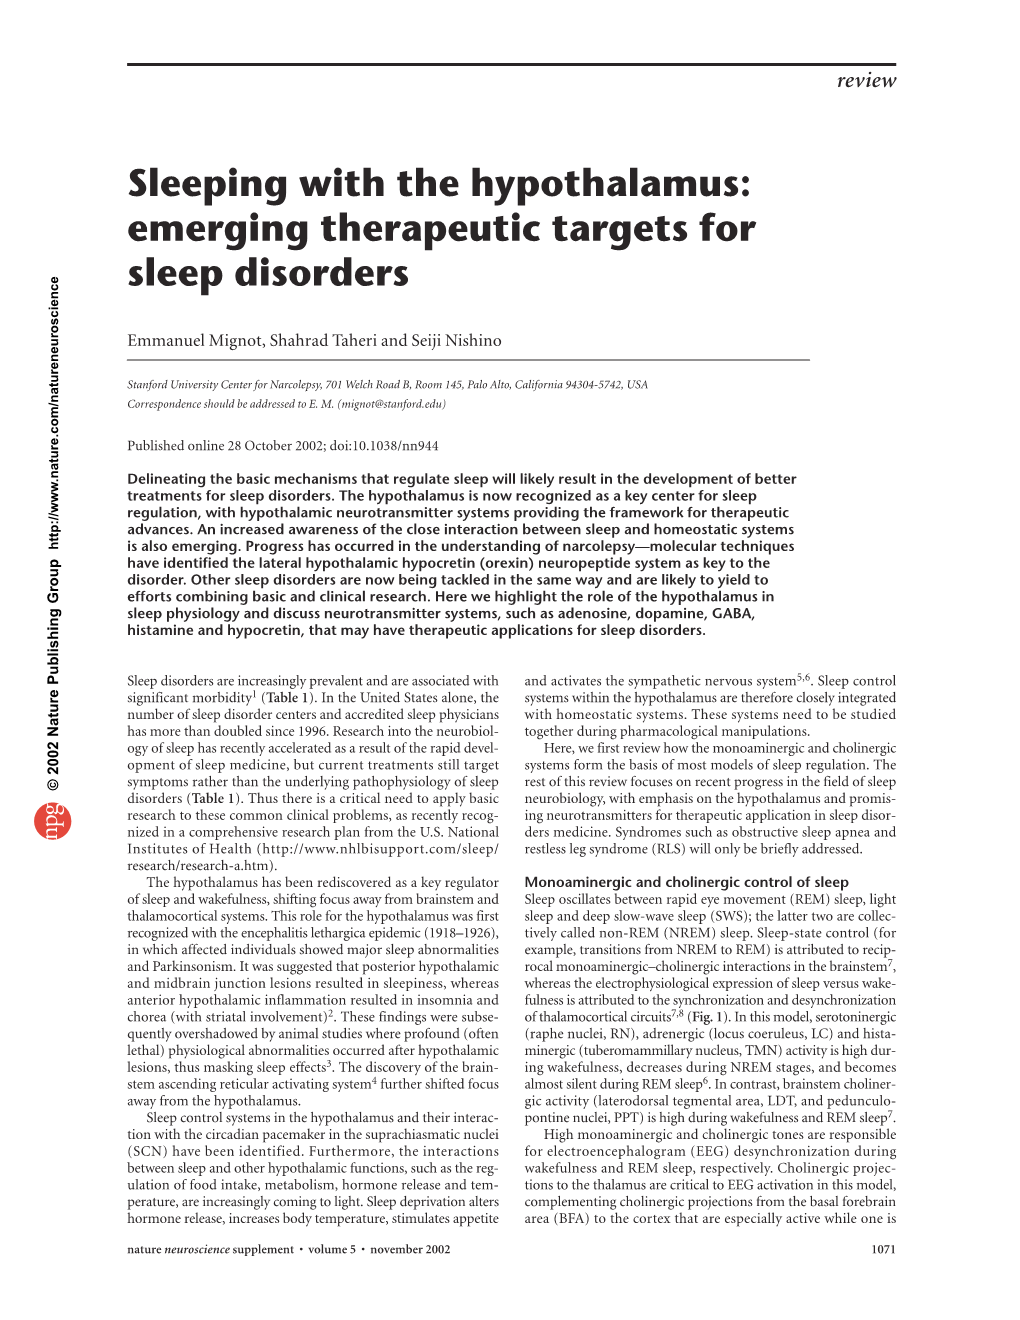 Sleeping with the Hypothalamus: Emerging Therapeutic Targets for Sleep Disorders